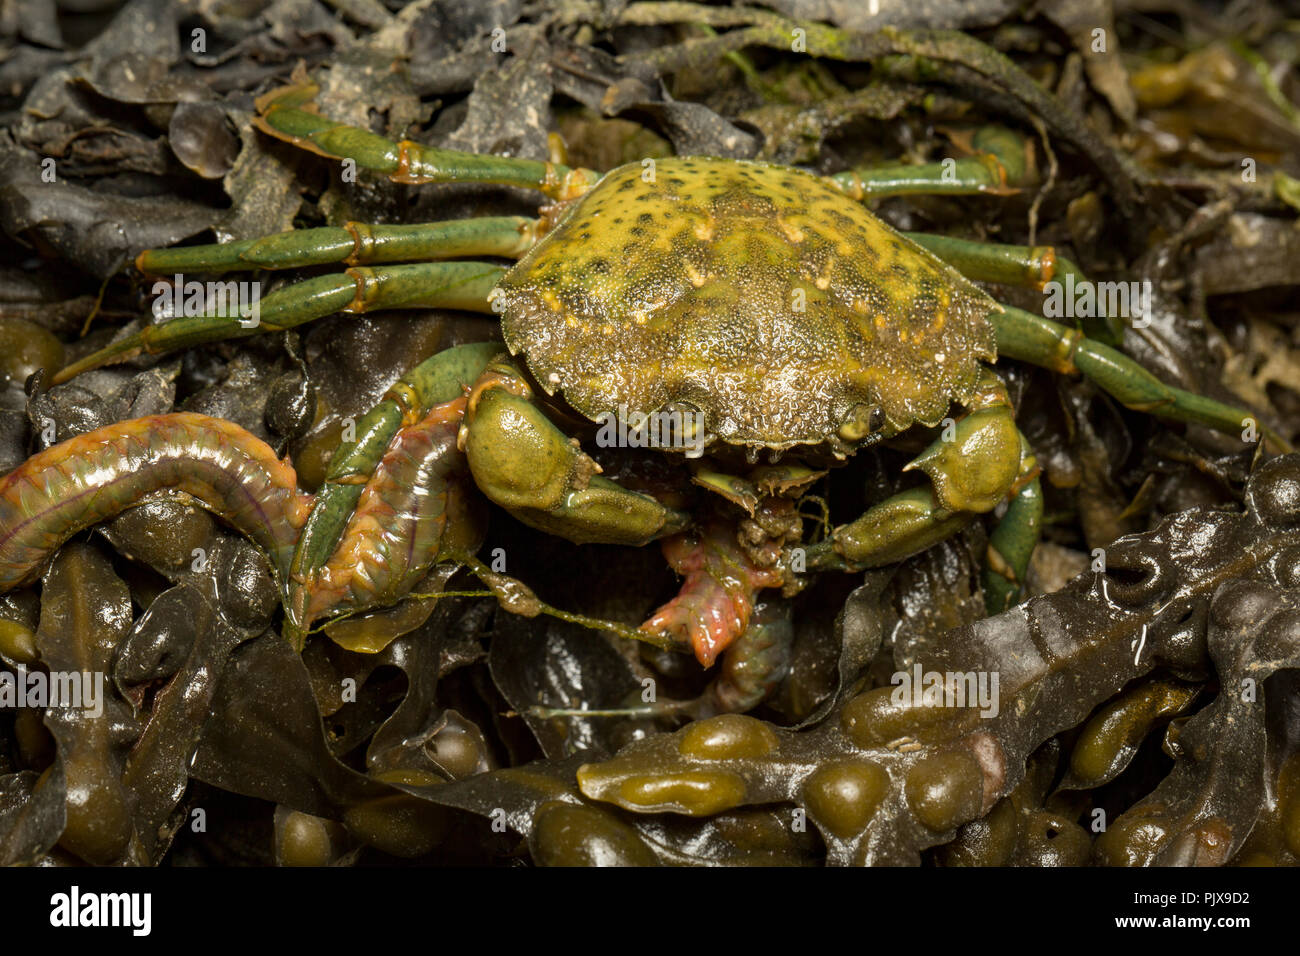 A Green Shore Crab, Carcinus maenas, on exposed rocks and seaweed feeding on a discarded king ragworm that had been used as fishing bait. Dorset Engla Stock Photo